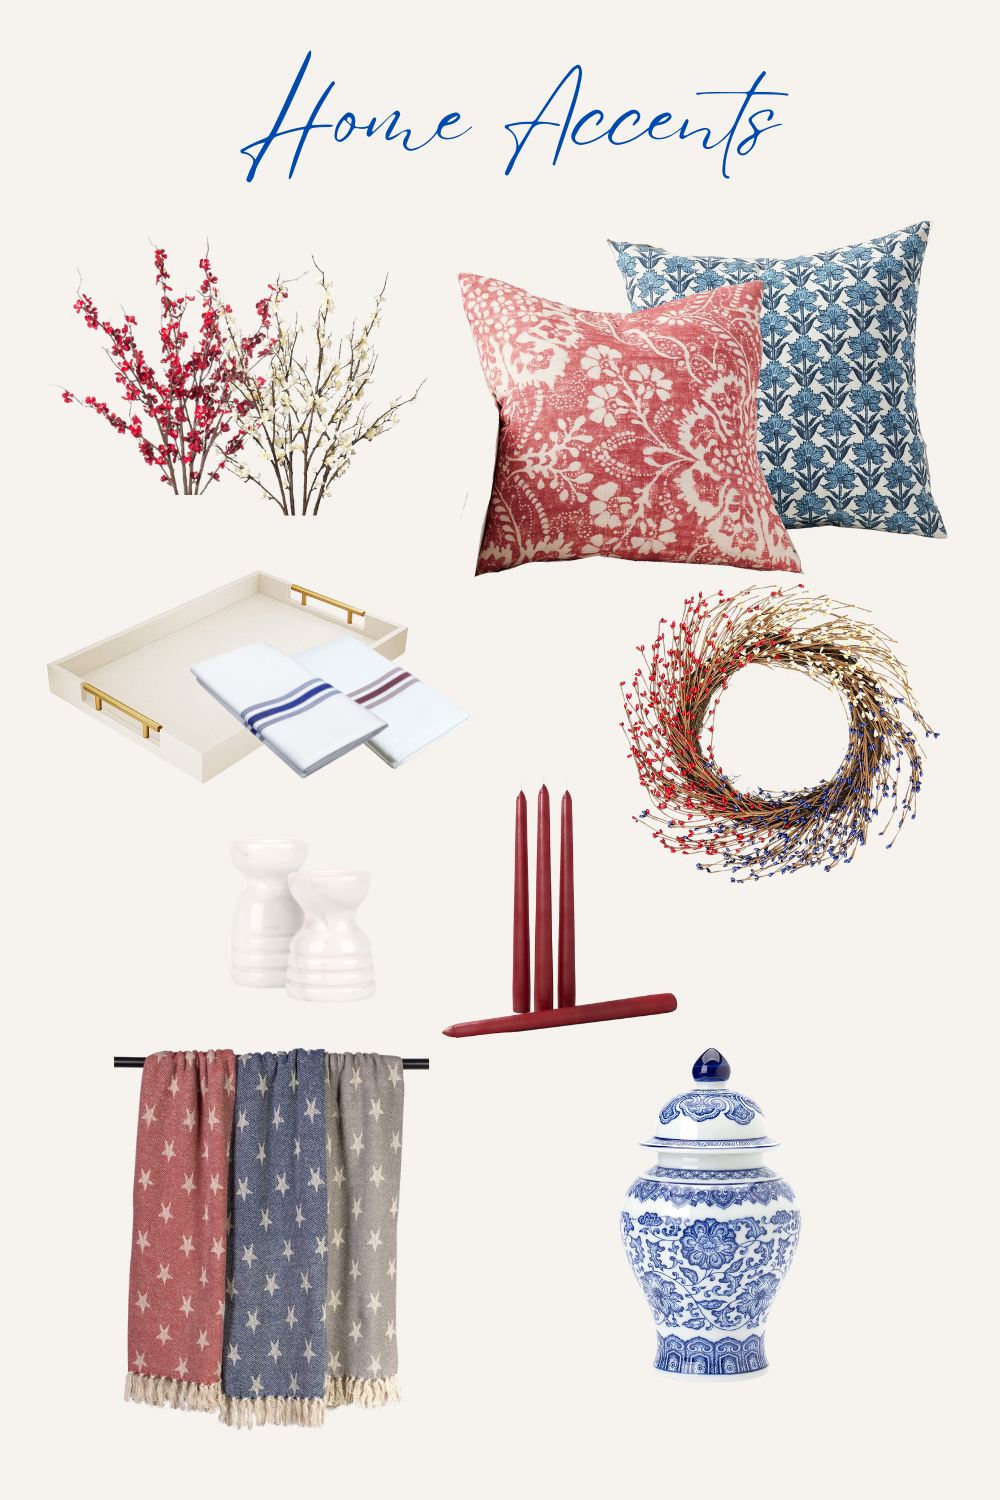 collage of patriotic home decor accents, floral blue and white pillows, faux stems, patriotic wreath, red candles, tray with patriotic linens, white candle holders, patriotic throw blankets, blue and white jar